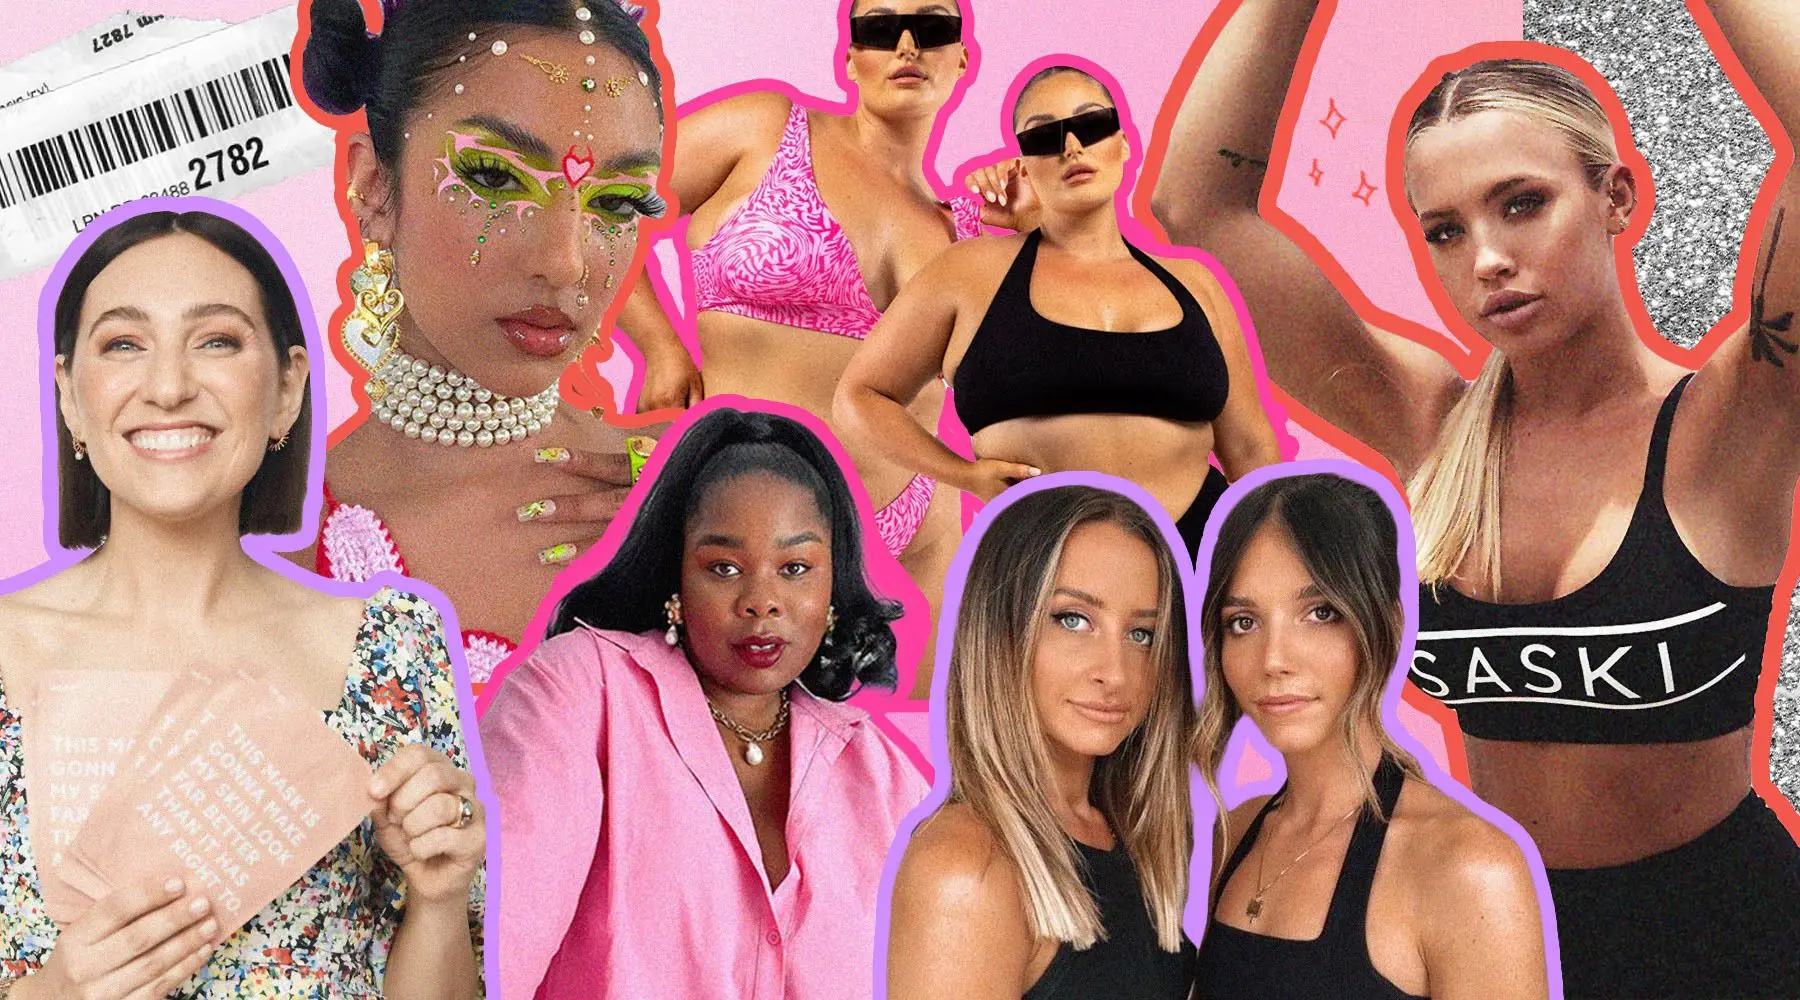 5 affordable lingerie brands to shop if you have big boobs